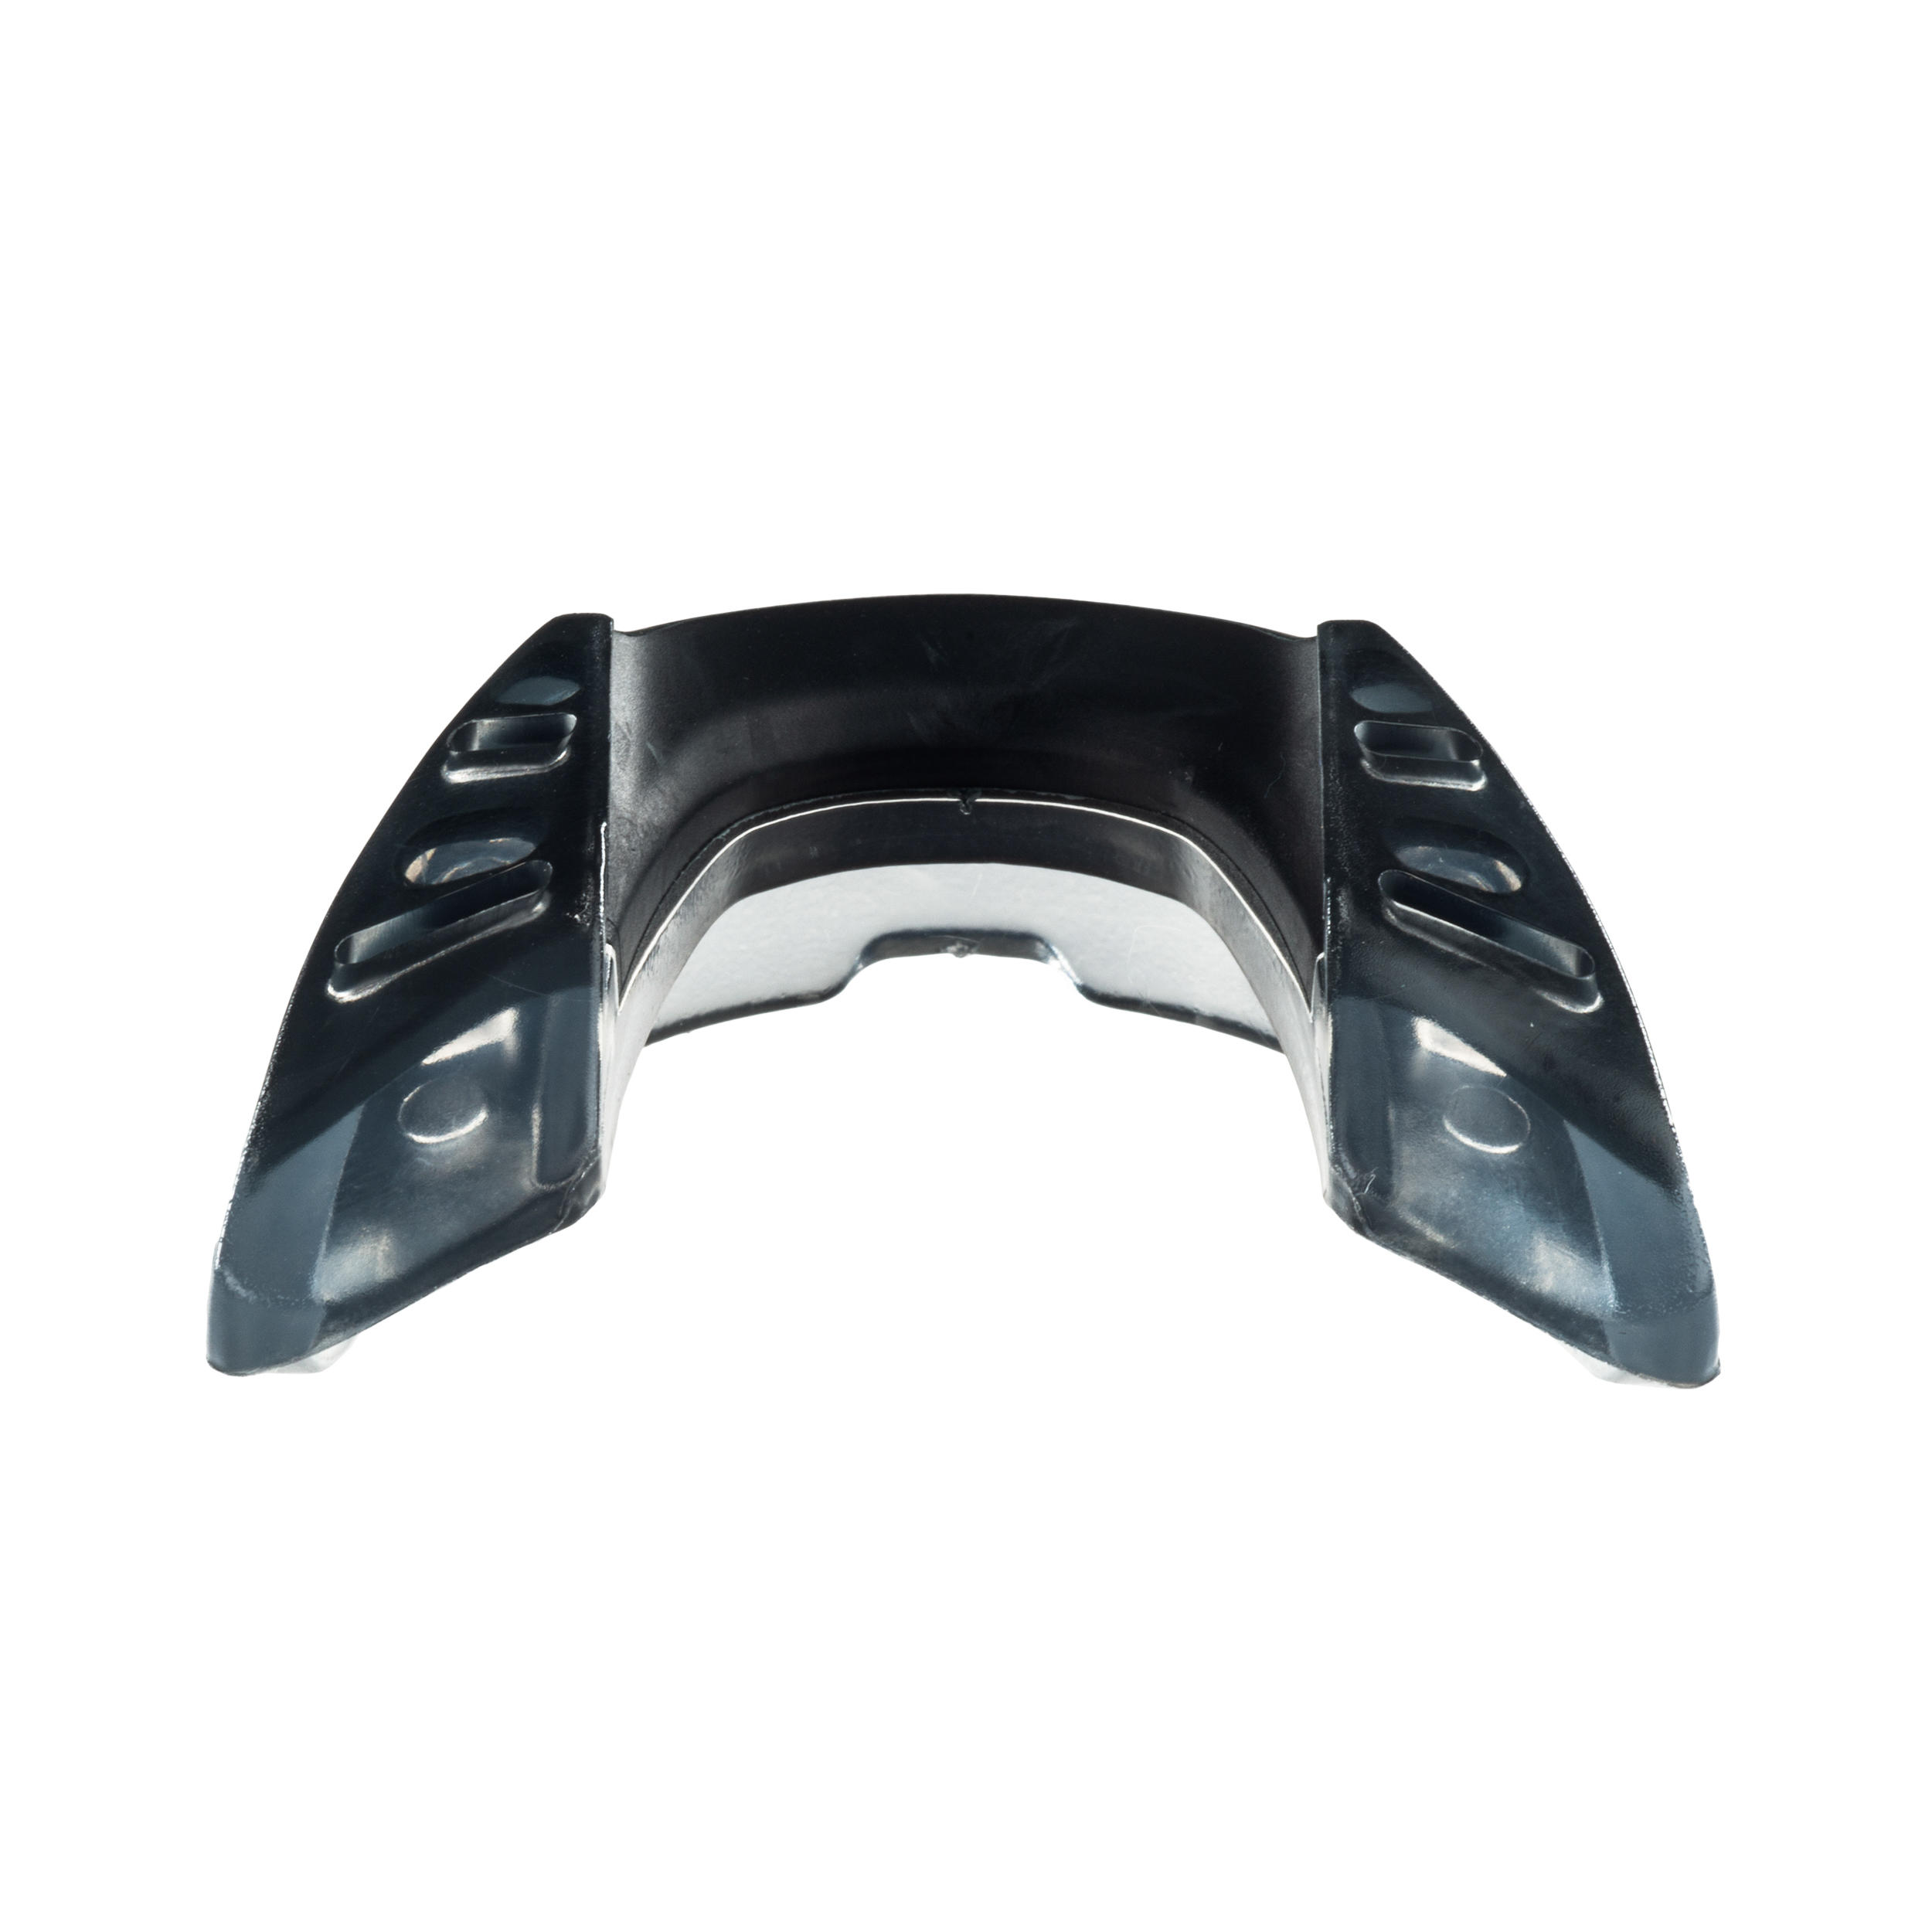 Rugby Mouthguard R500 Size M (Players 1.4 m To 1.7 m) - Black 4/6